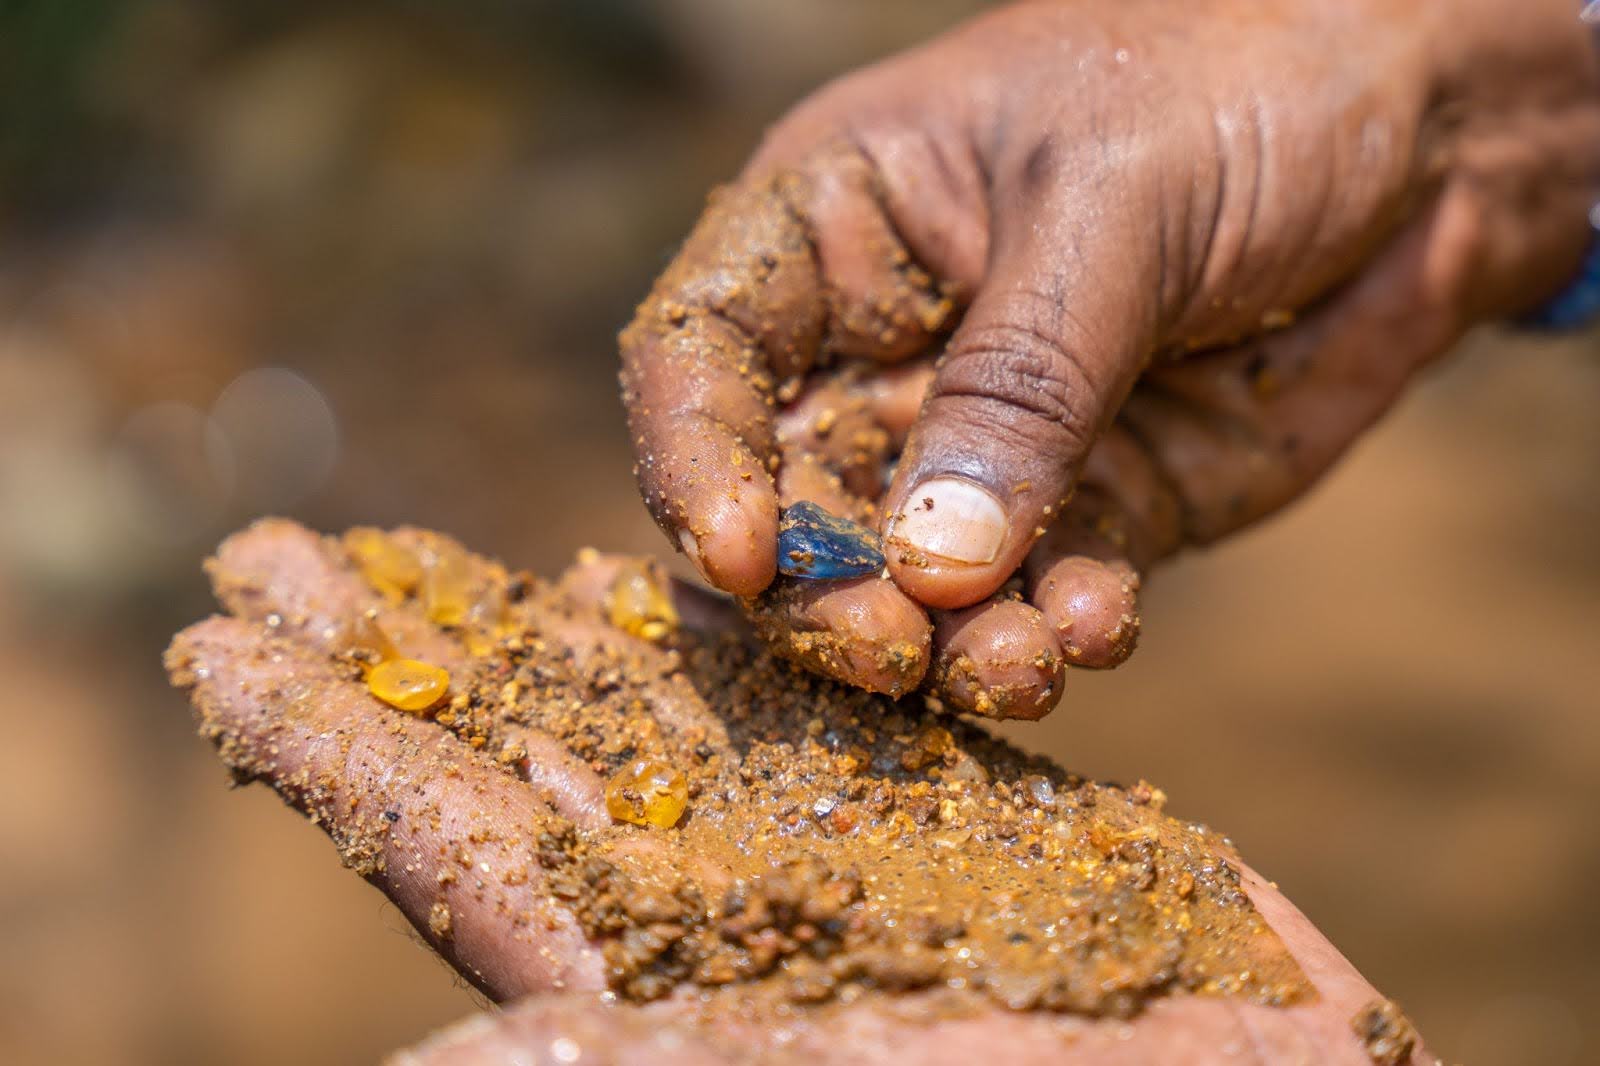 Man selecting yellow and blue gemstone roughs from illam-rich gravel using his hands with leftover, heavier material left on his palm